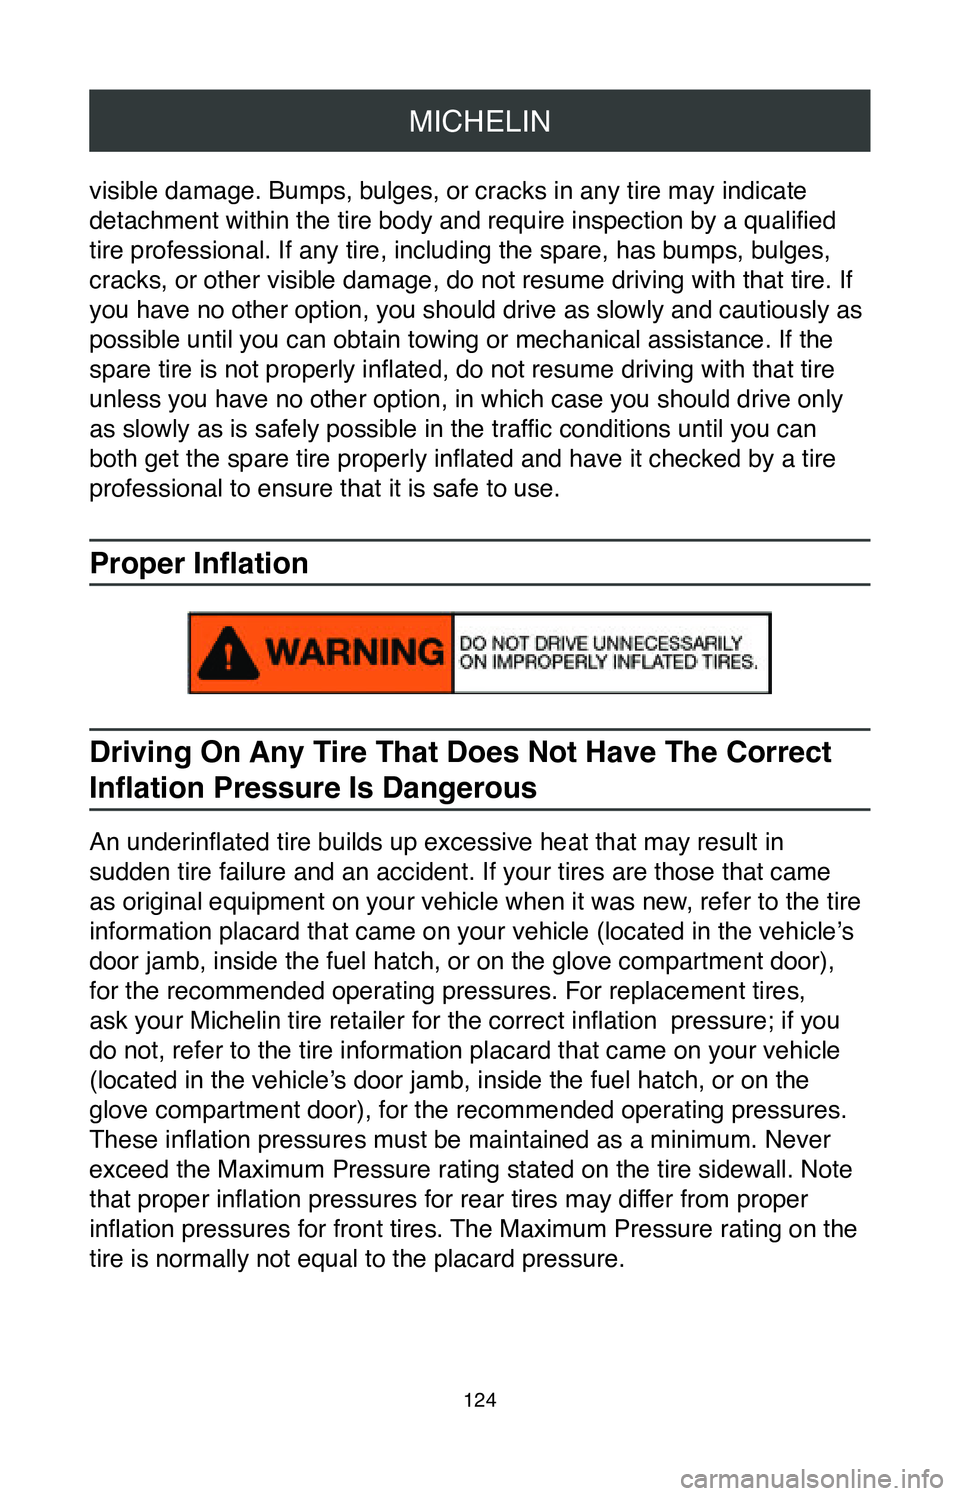 TOYOTA CAMRY 2020  Warranties & Maintenance Guides (in English) MICHELIN
124
visible damage. Bumps, bulges, or cracks in any tire may indicate 
detachment within the tire body and require inspection by a qualified 
tire professional. If any tire, including the spa